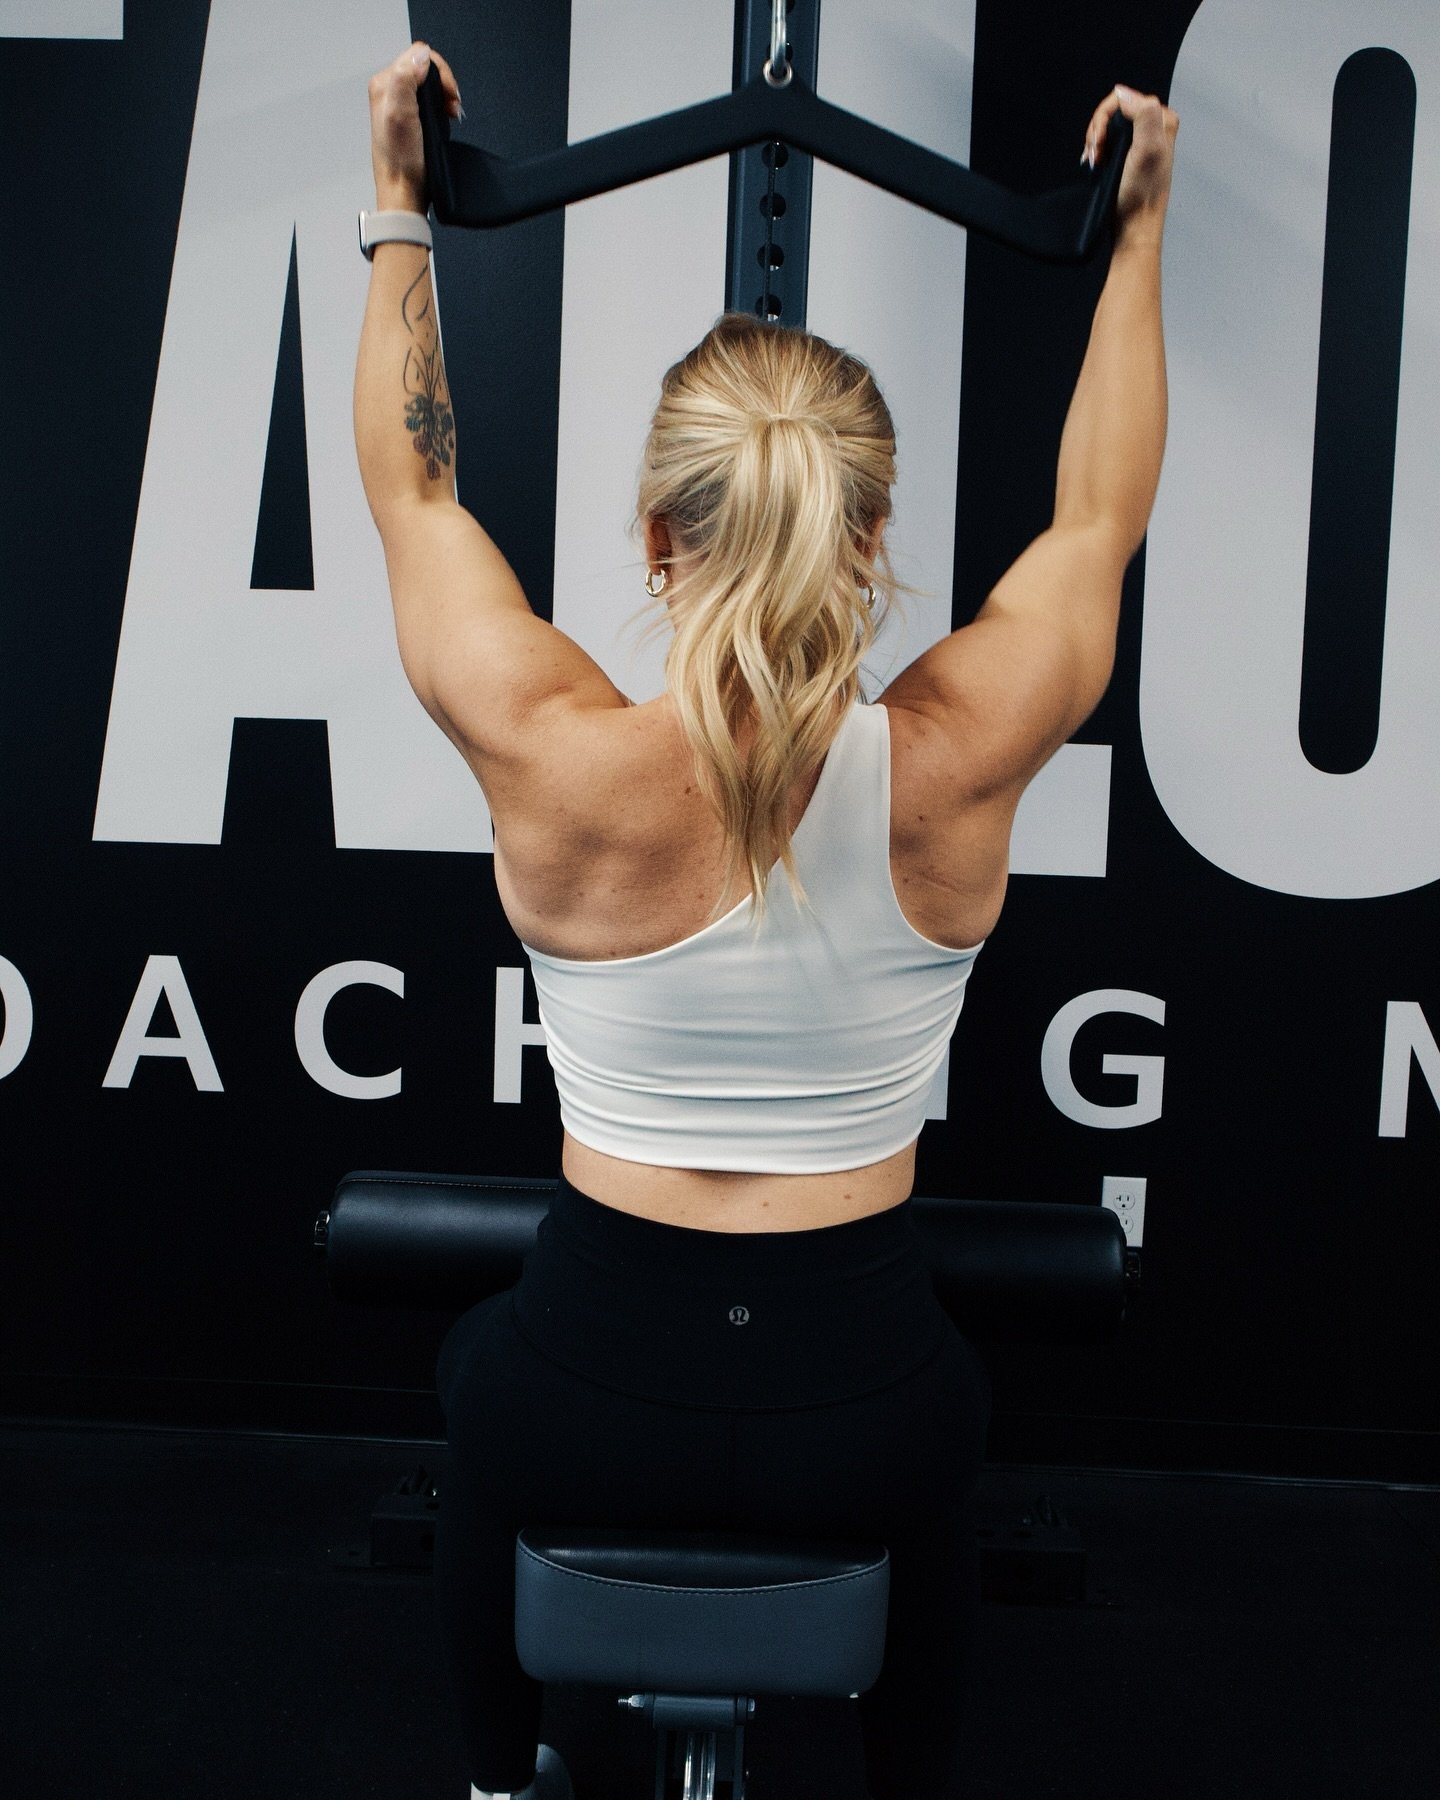 Strong backs aren&rsquo;t just for the boys and if you&rsquo;re like &ldquo;dang, I want carry all my grocery bags inside with one trip, kinda fit&rdquo;&hellip;don&rsquo;t skip your upper body days😉

Some of my favorite exercises for a stronger bac